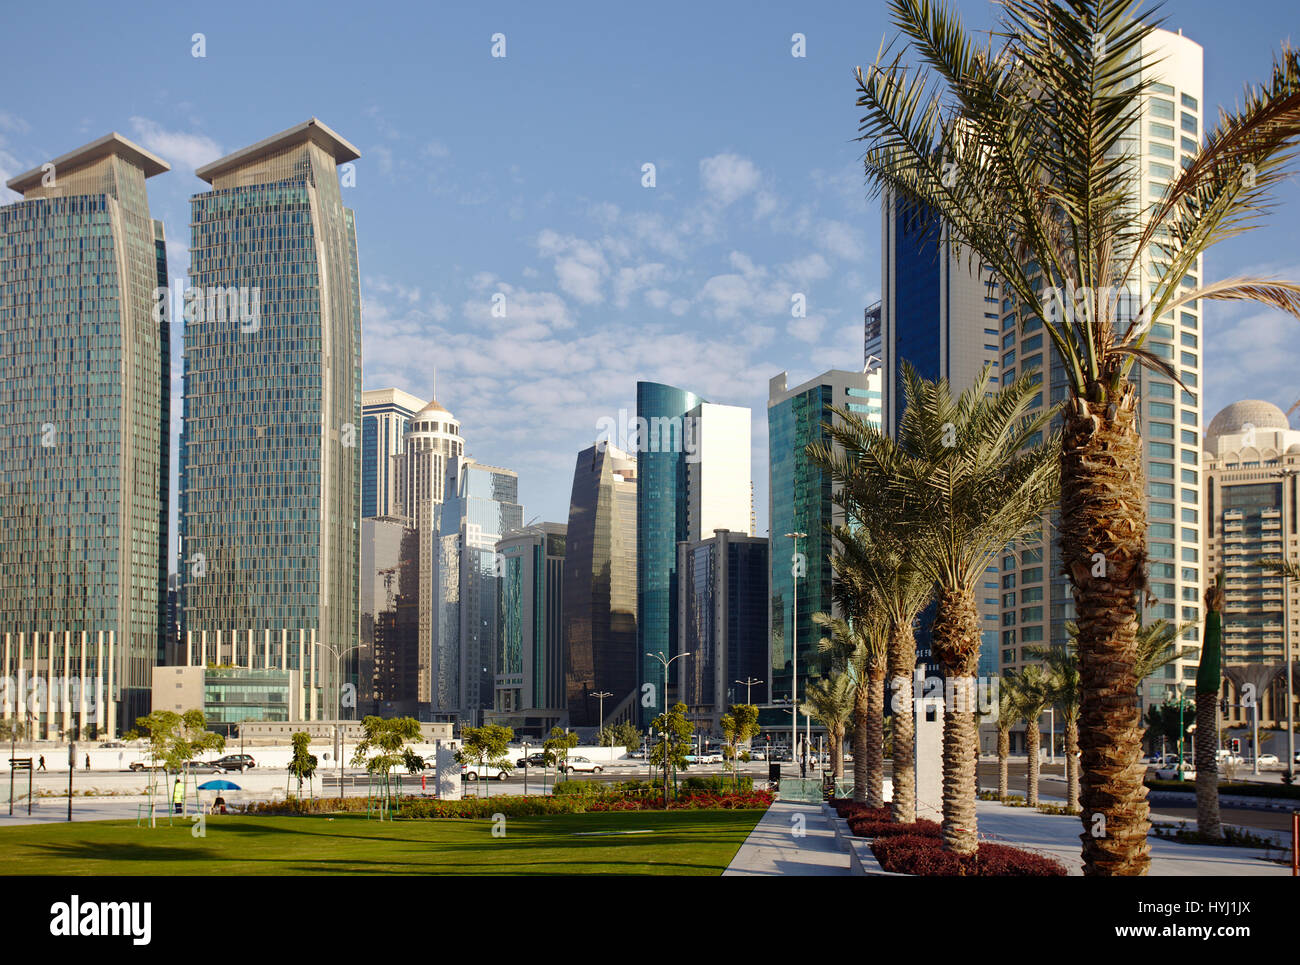 DOHA, QATAR - FEBRUARY 17, 2016: The high-rise district of Doha, seen from the road through the recently completed Hotel Park, and date palms in the f Stock Photo